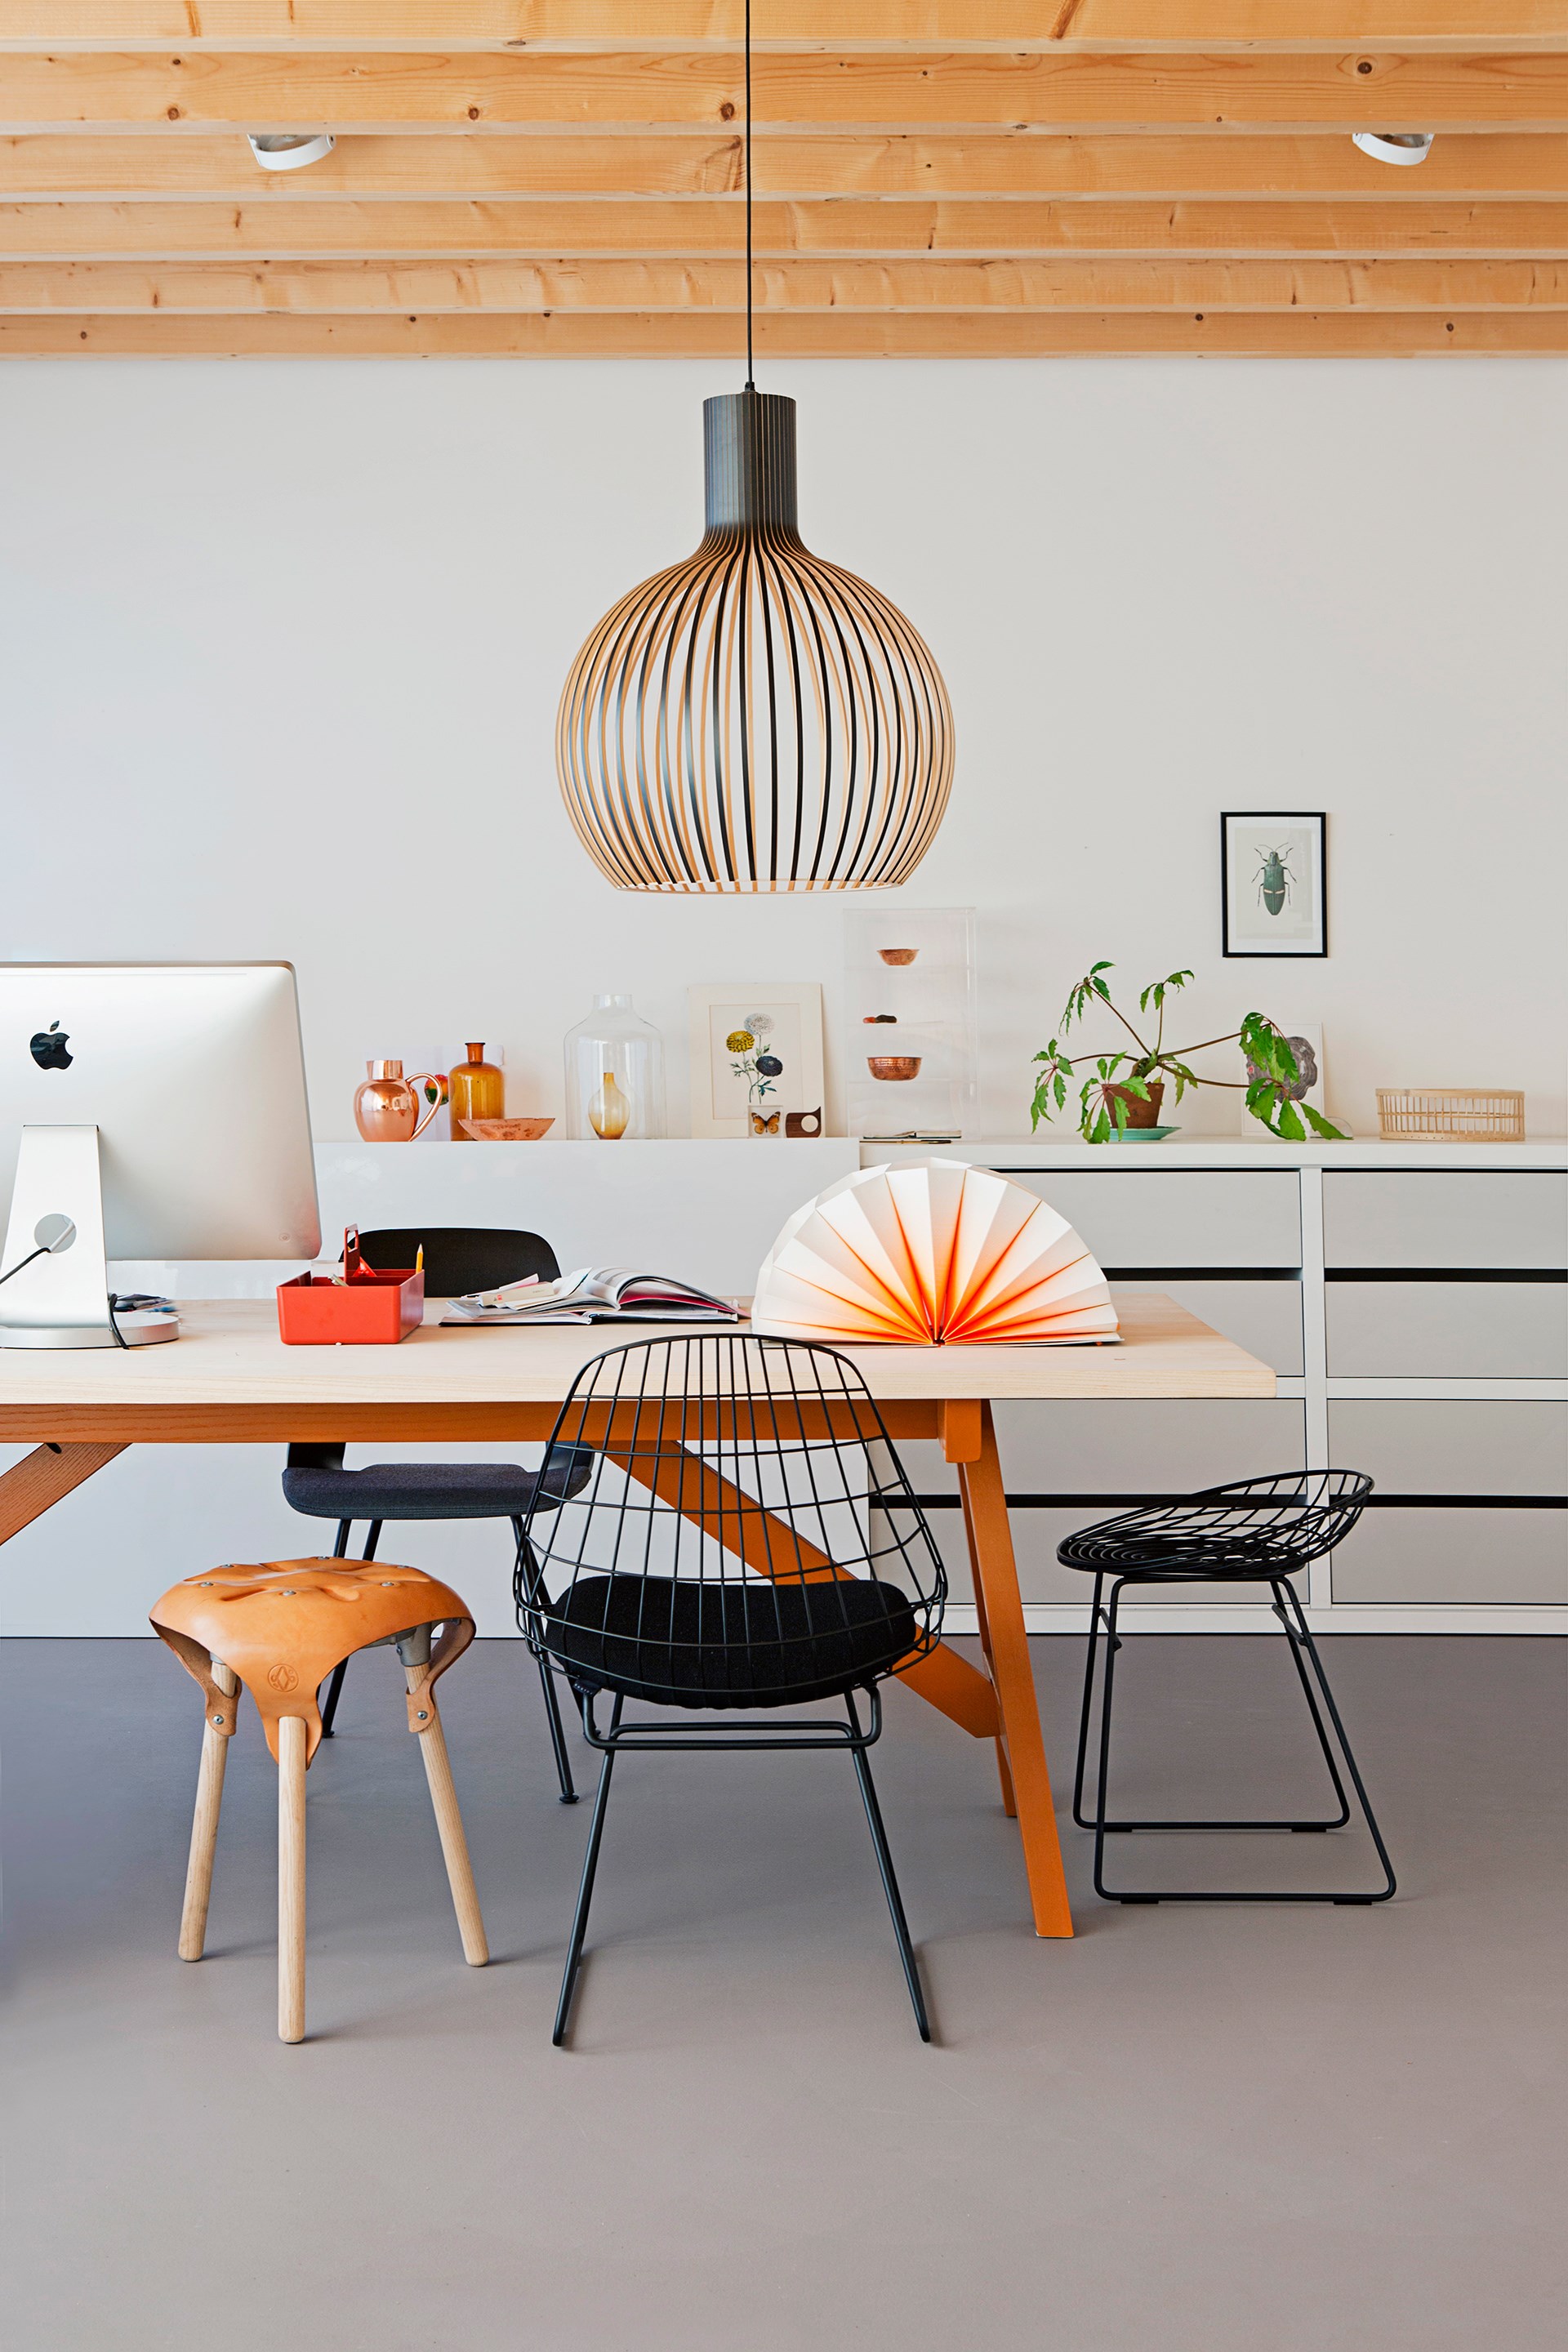 Thin strips of timber moulded into a bulbous shape form a beautifully sculptural light that makes a grand addition to this office space. Take a look around this [furniture designer's Dutch bungalow](http://www.homestolove.com.au/gallery-christiens-simply-beautiful-dutch-bungalow-2172|target="_blank"). Photo: Jeltje Janmaat @ House of Pictures / *real living*